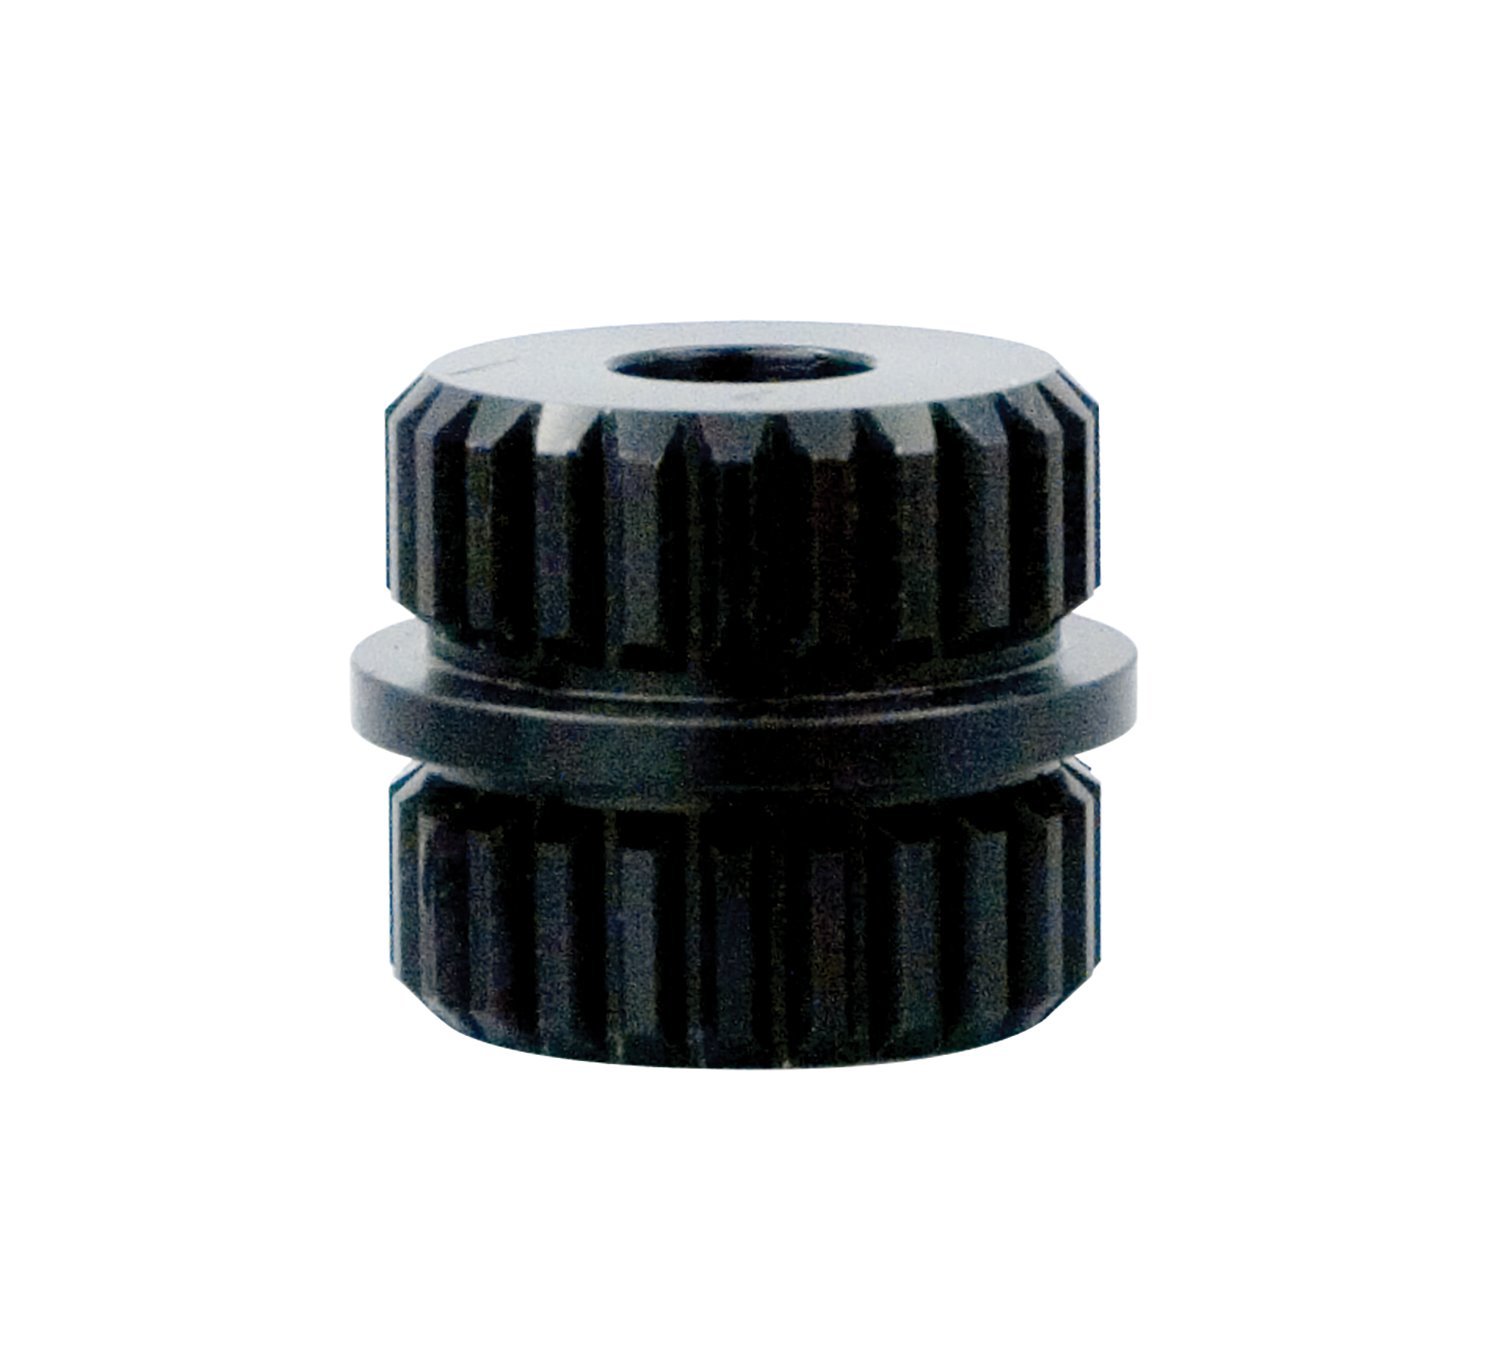 Stack Adapter With 3.25" Washer